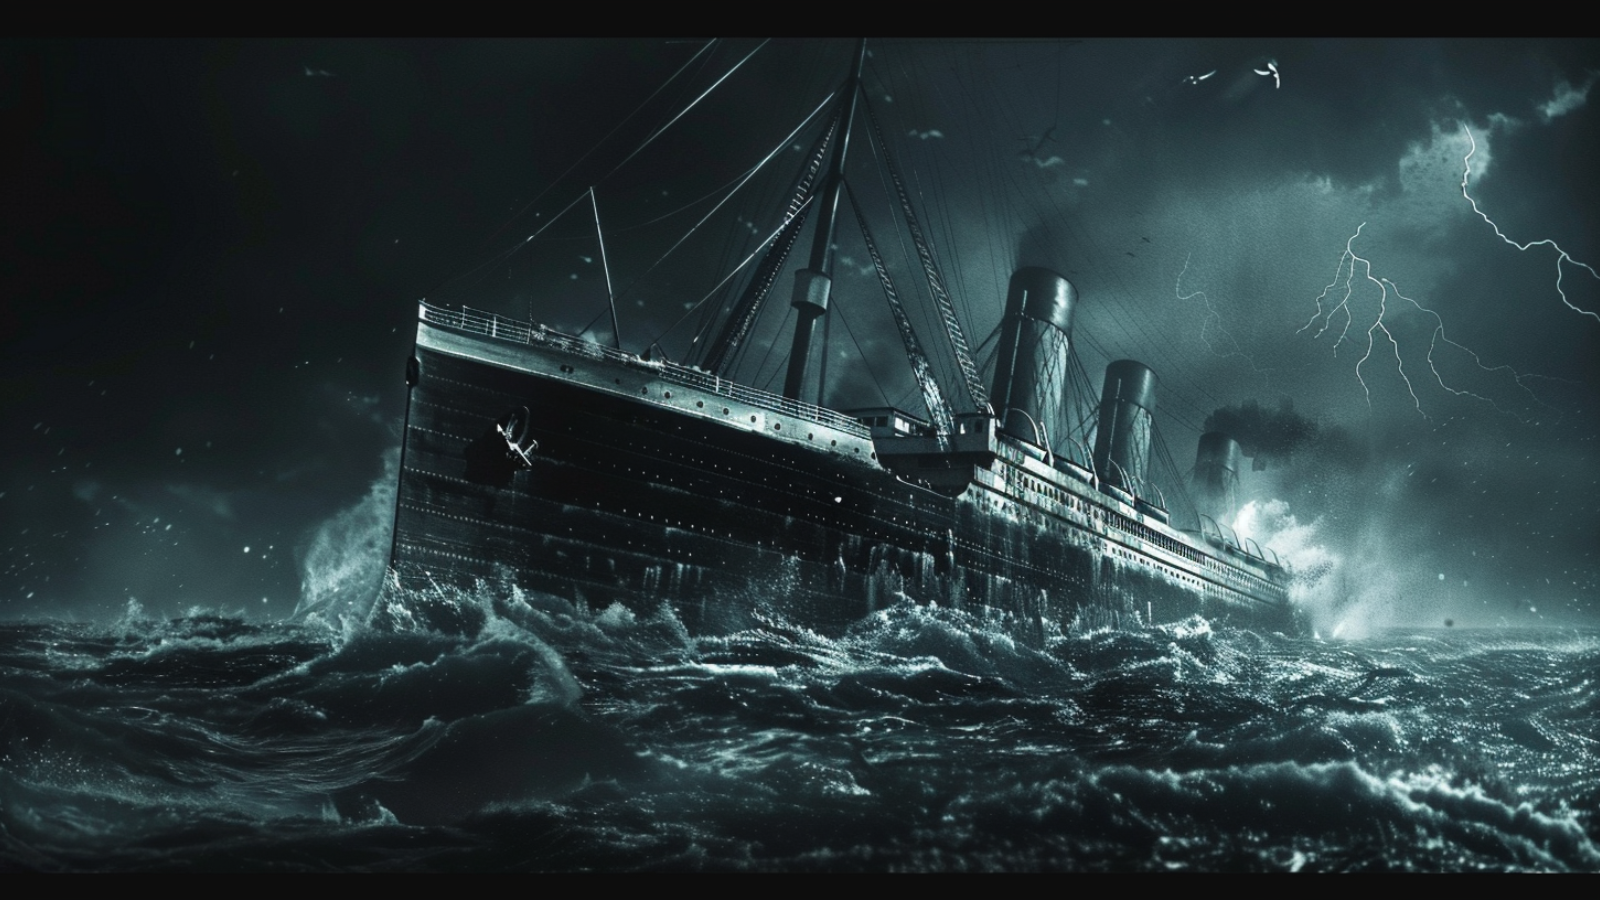 Representation of the sinking of the Titanic